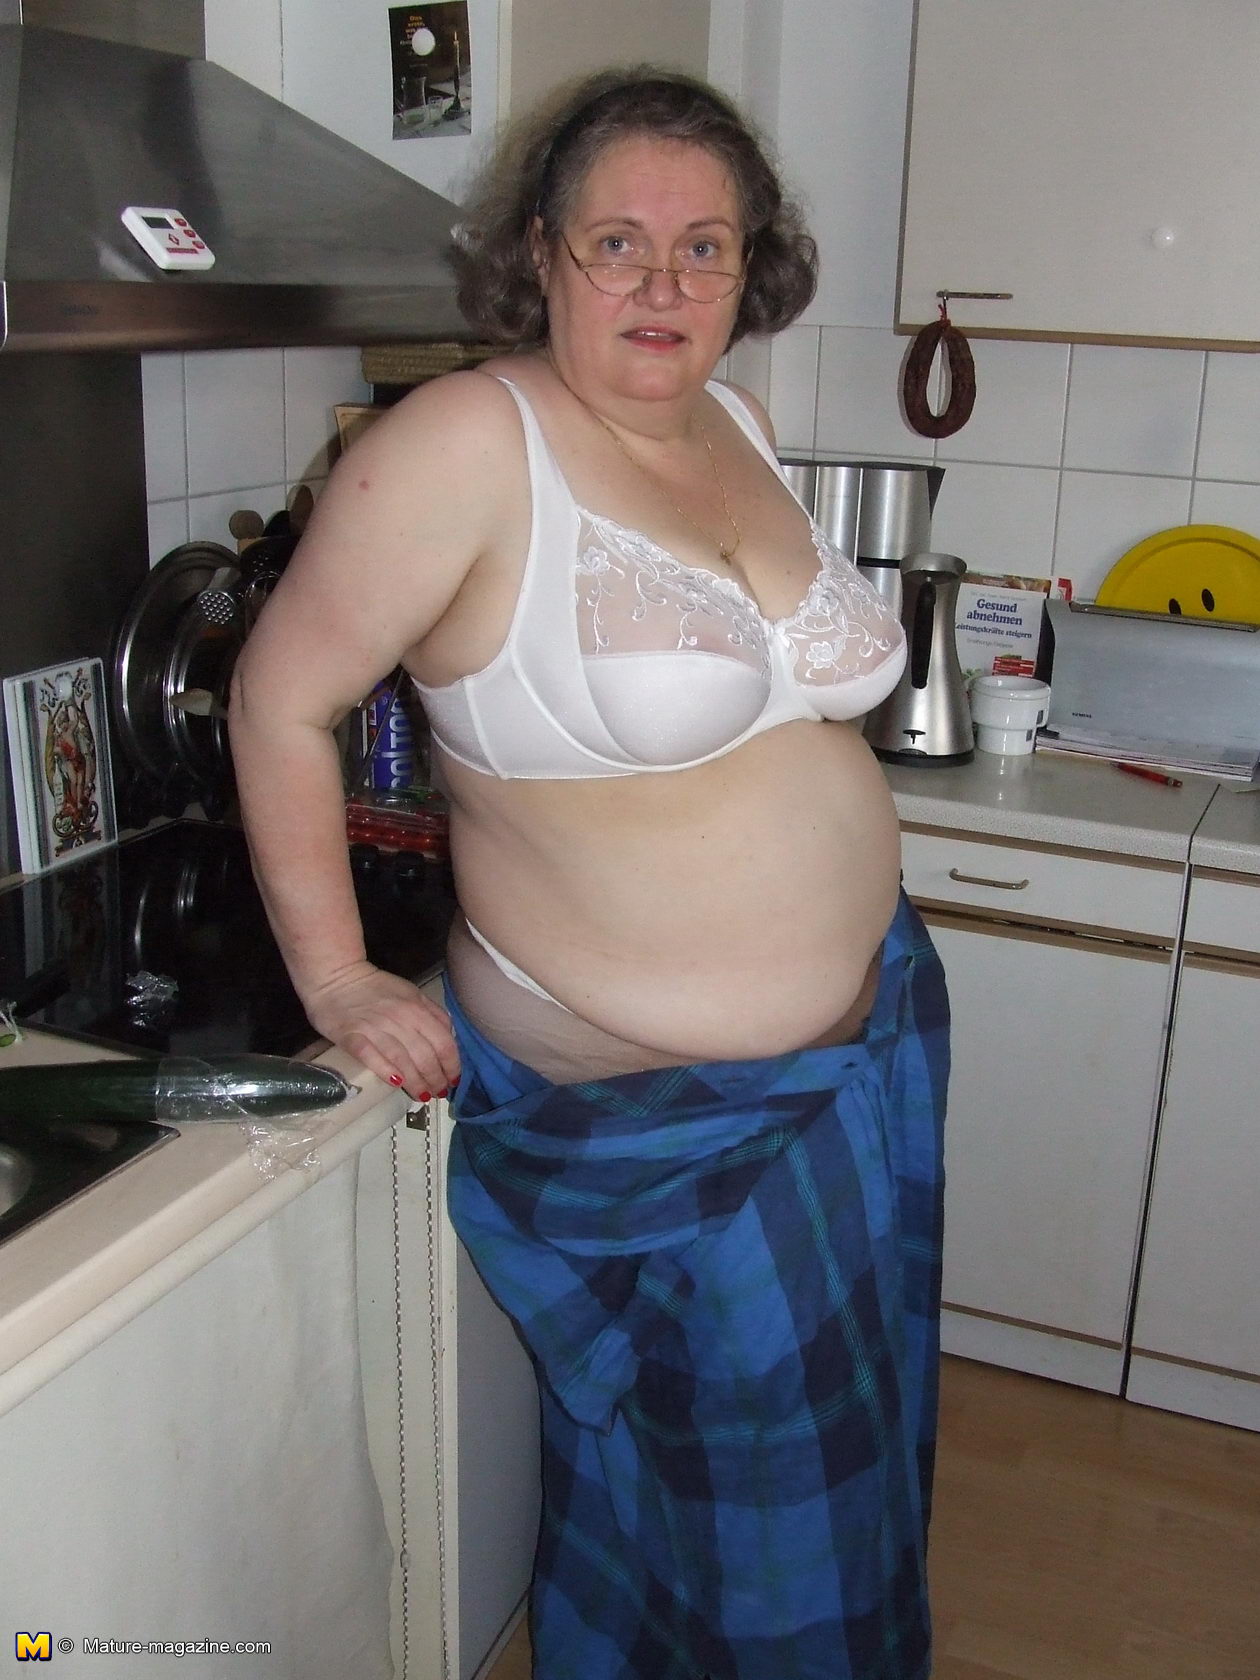 Mature Bbw Housewife - Amateur mature housewife bbw apologise, but